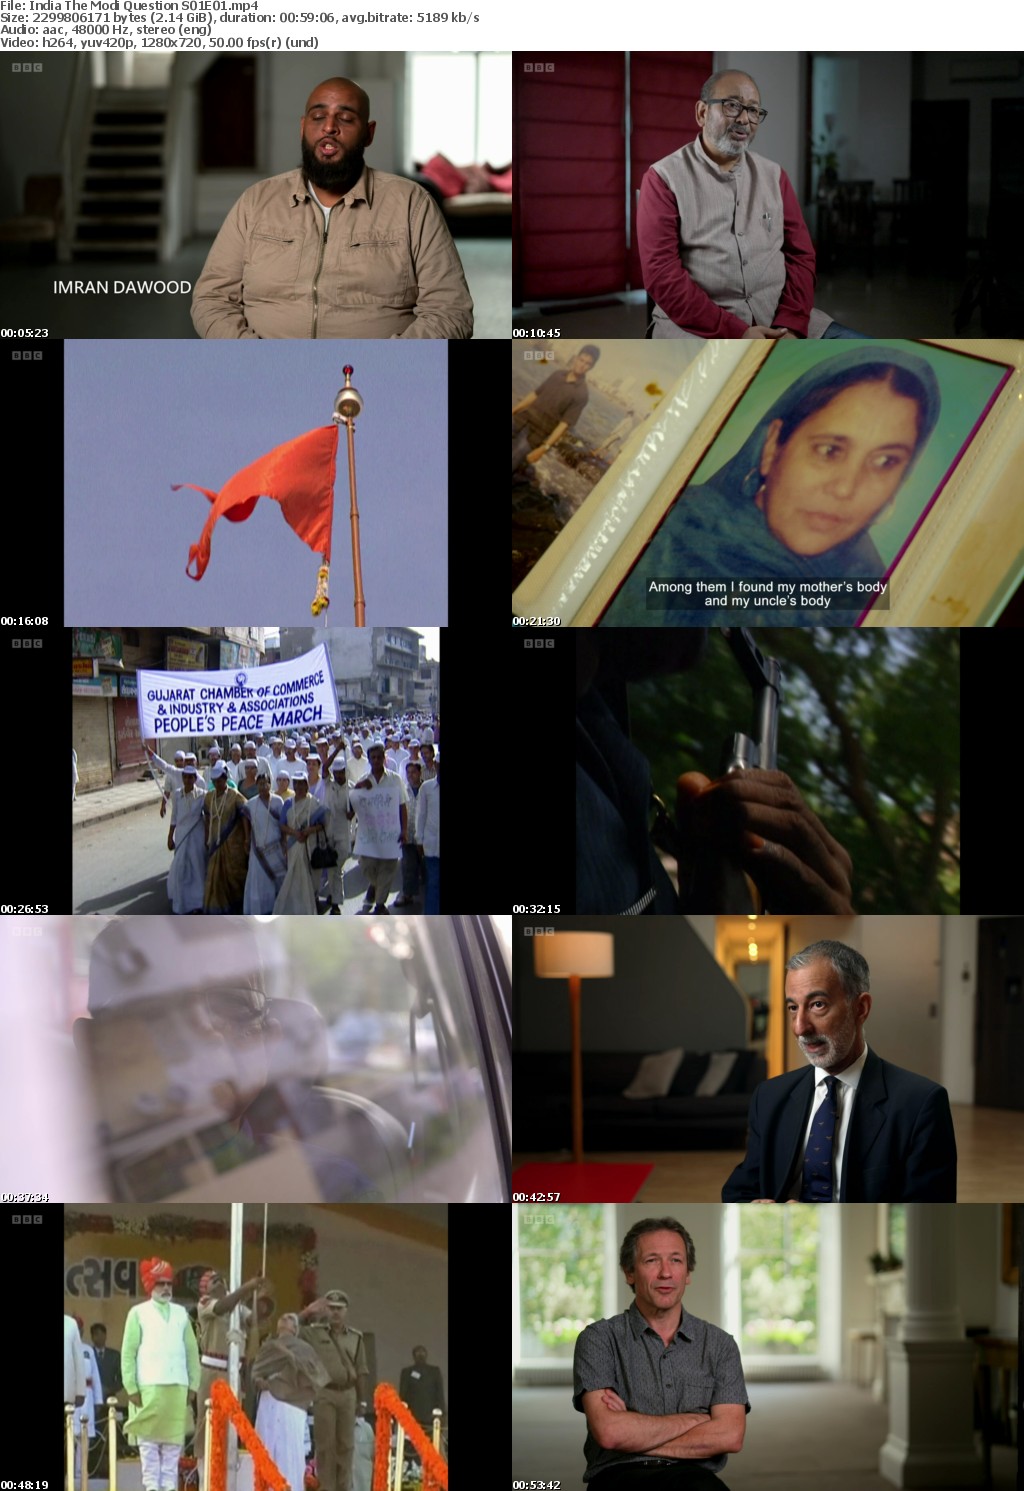 India The Modi Question S01 complete (1280x720p HD, 50fps, soft Eng subs)